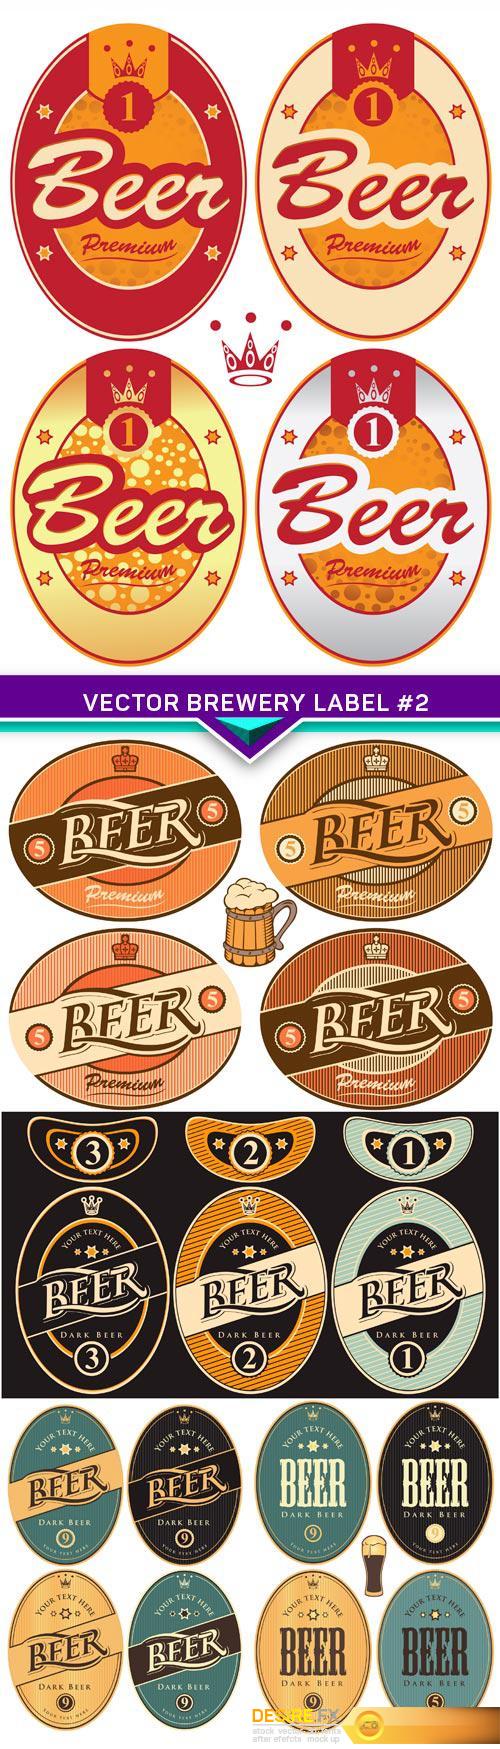 Vector brewery label #2 5X EPS